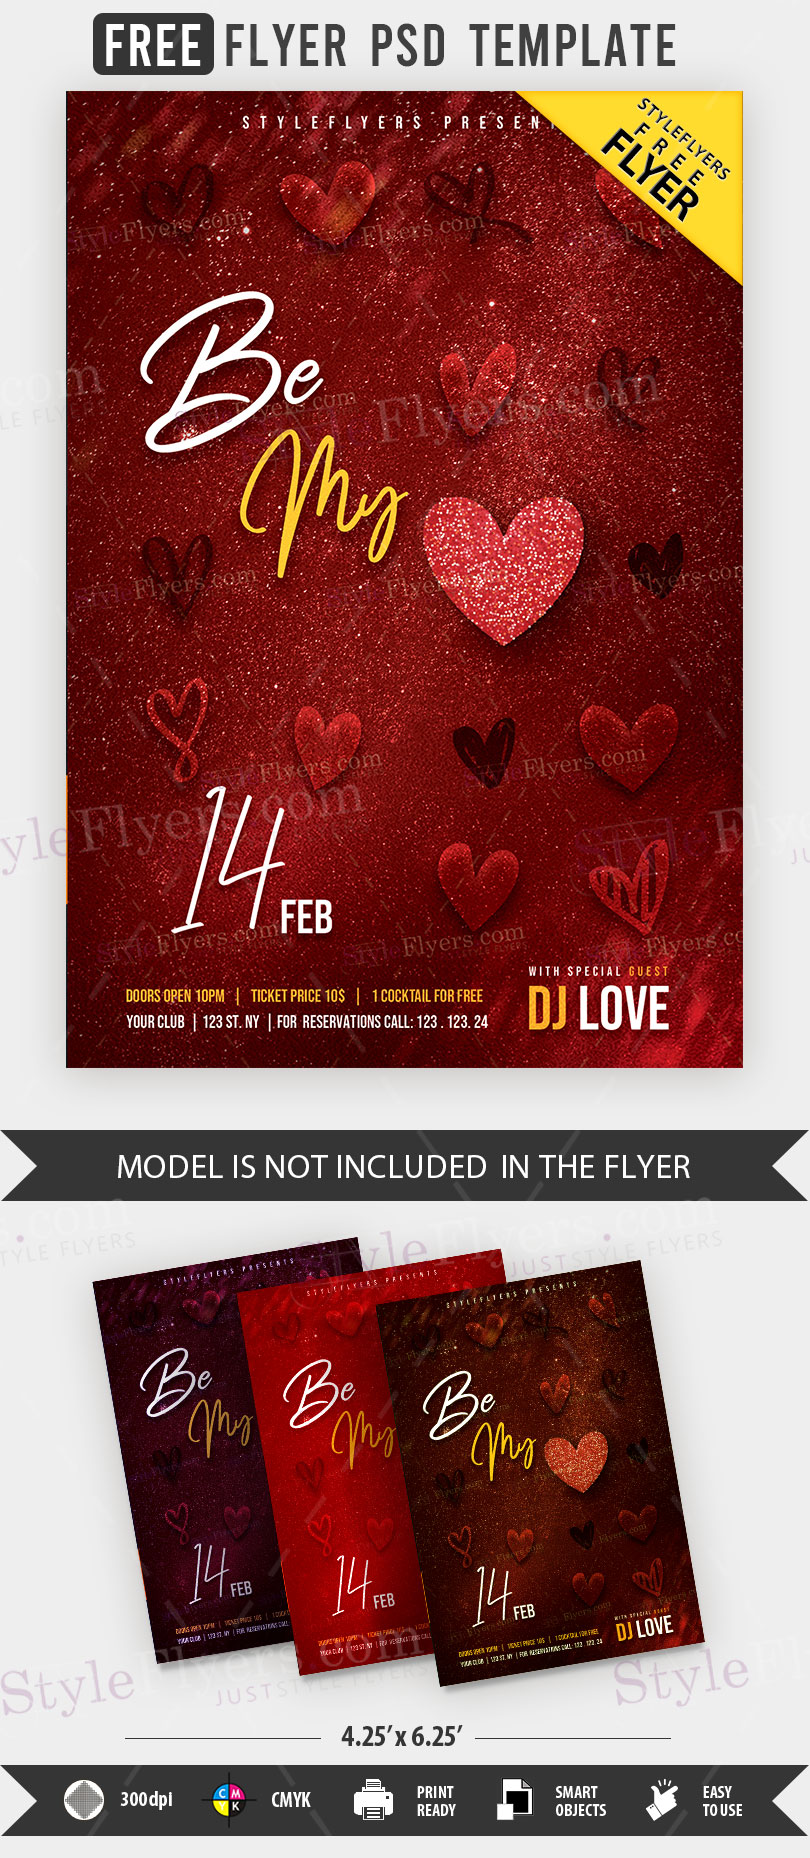 preview_free_FLYER_psd